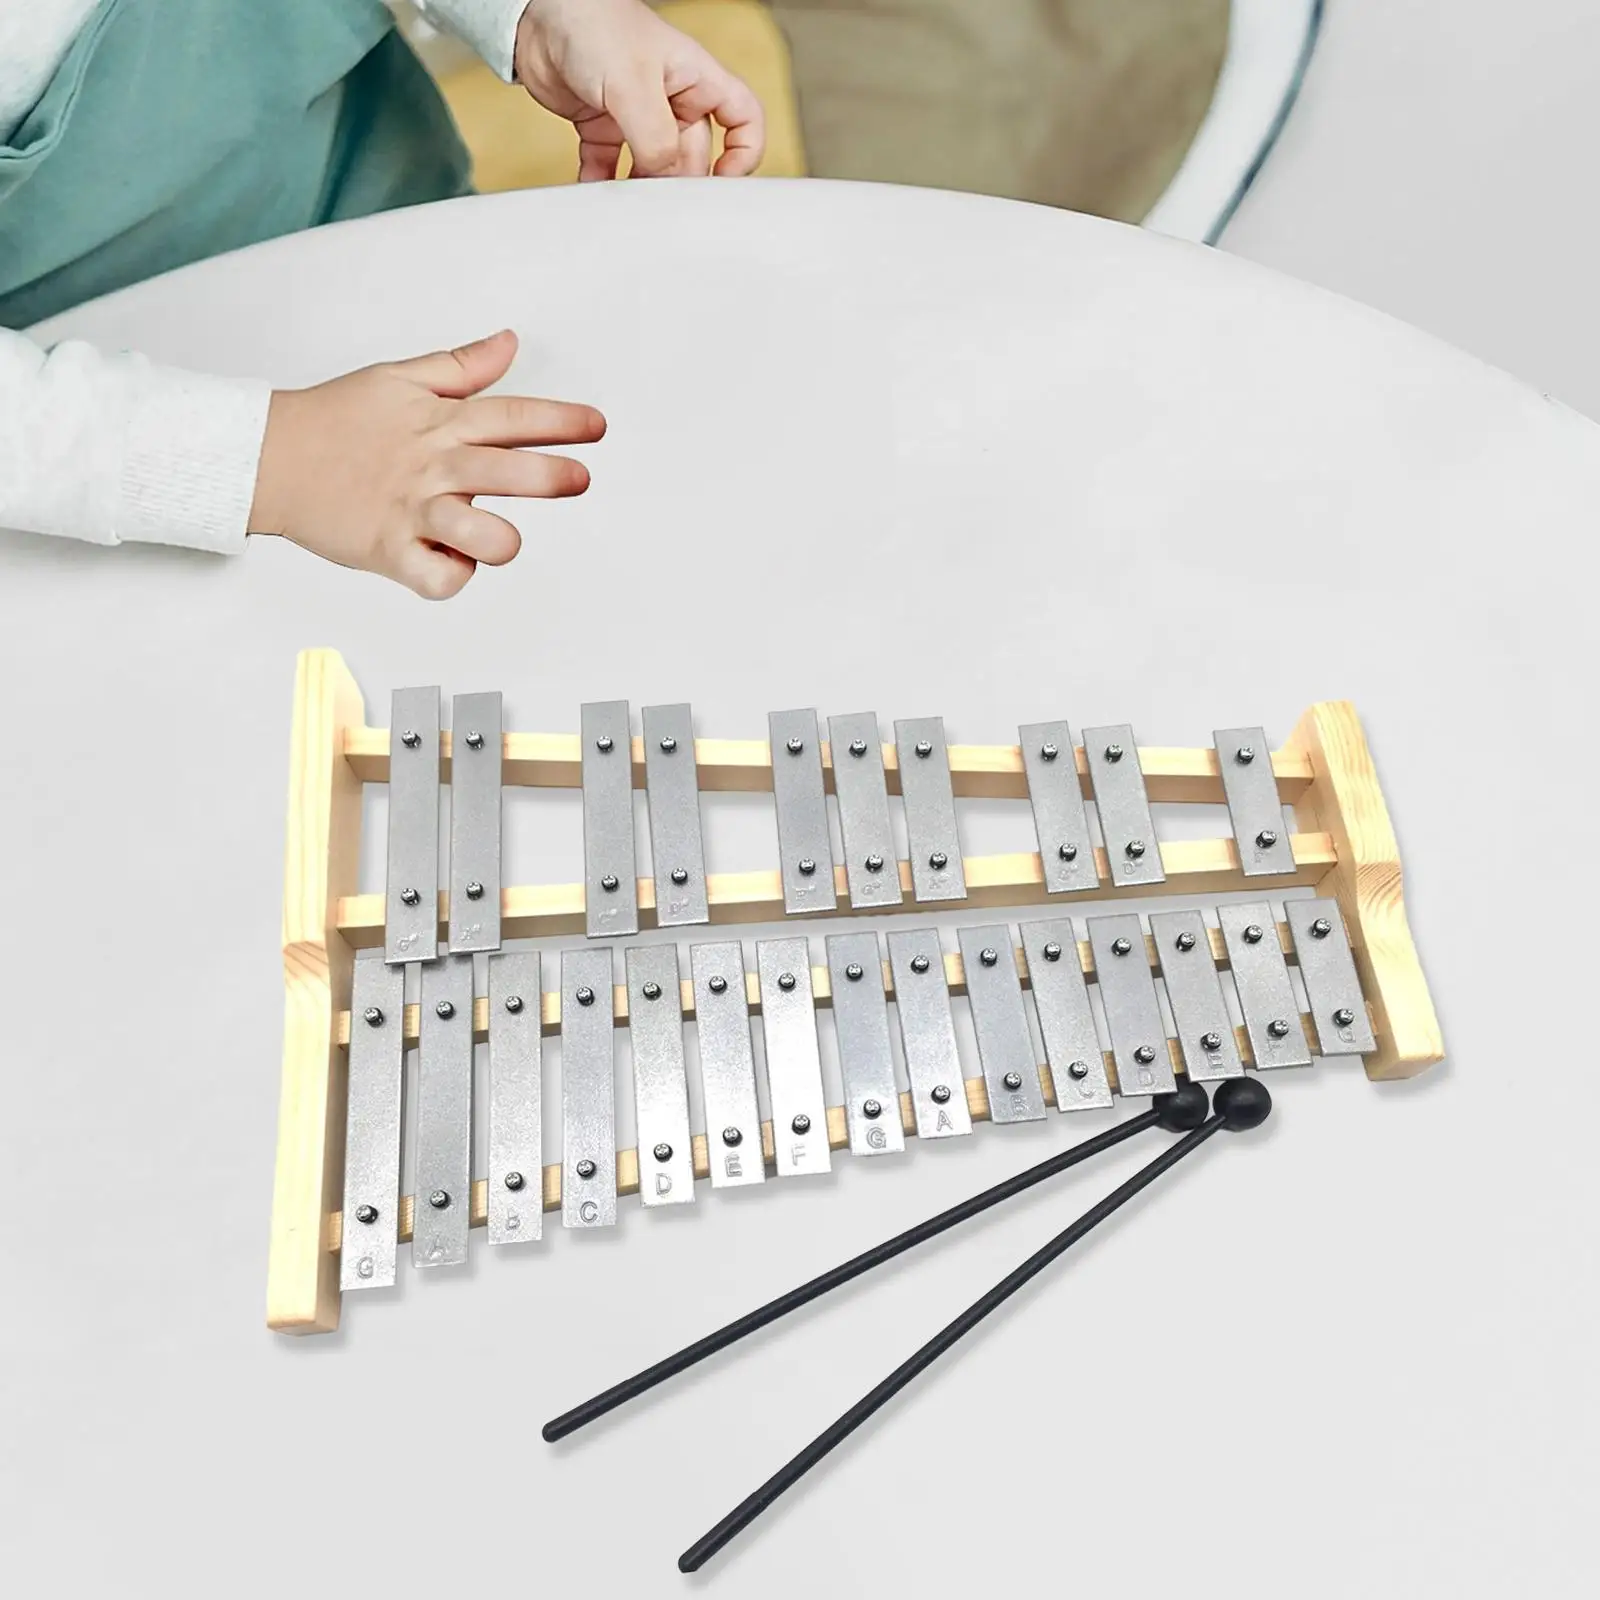 25 Key Glockenspiel Portable Gifts for Beginners Professional Wooden Frame Aluminum Xylophone with Mallets Musical Instrument